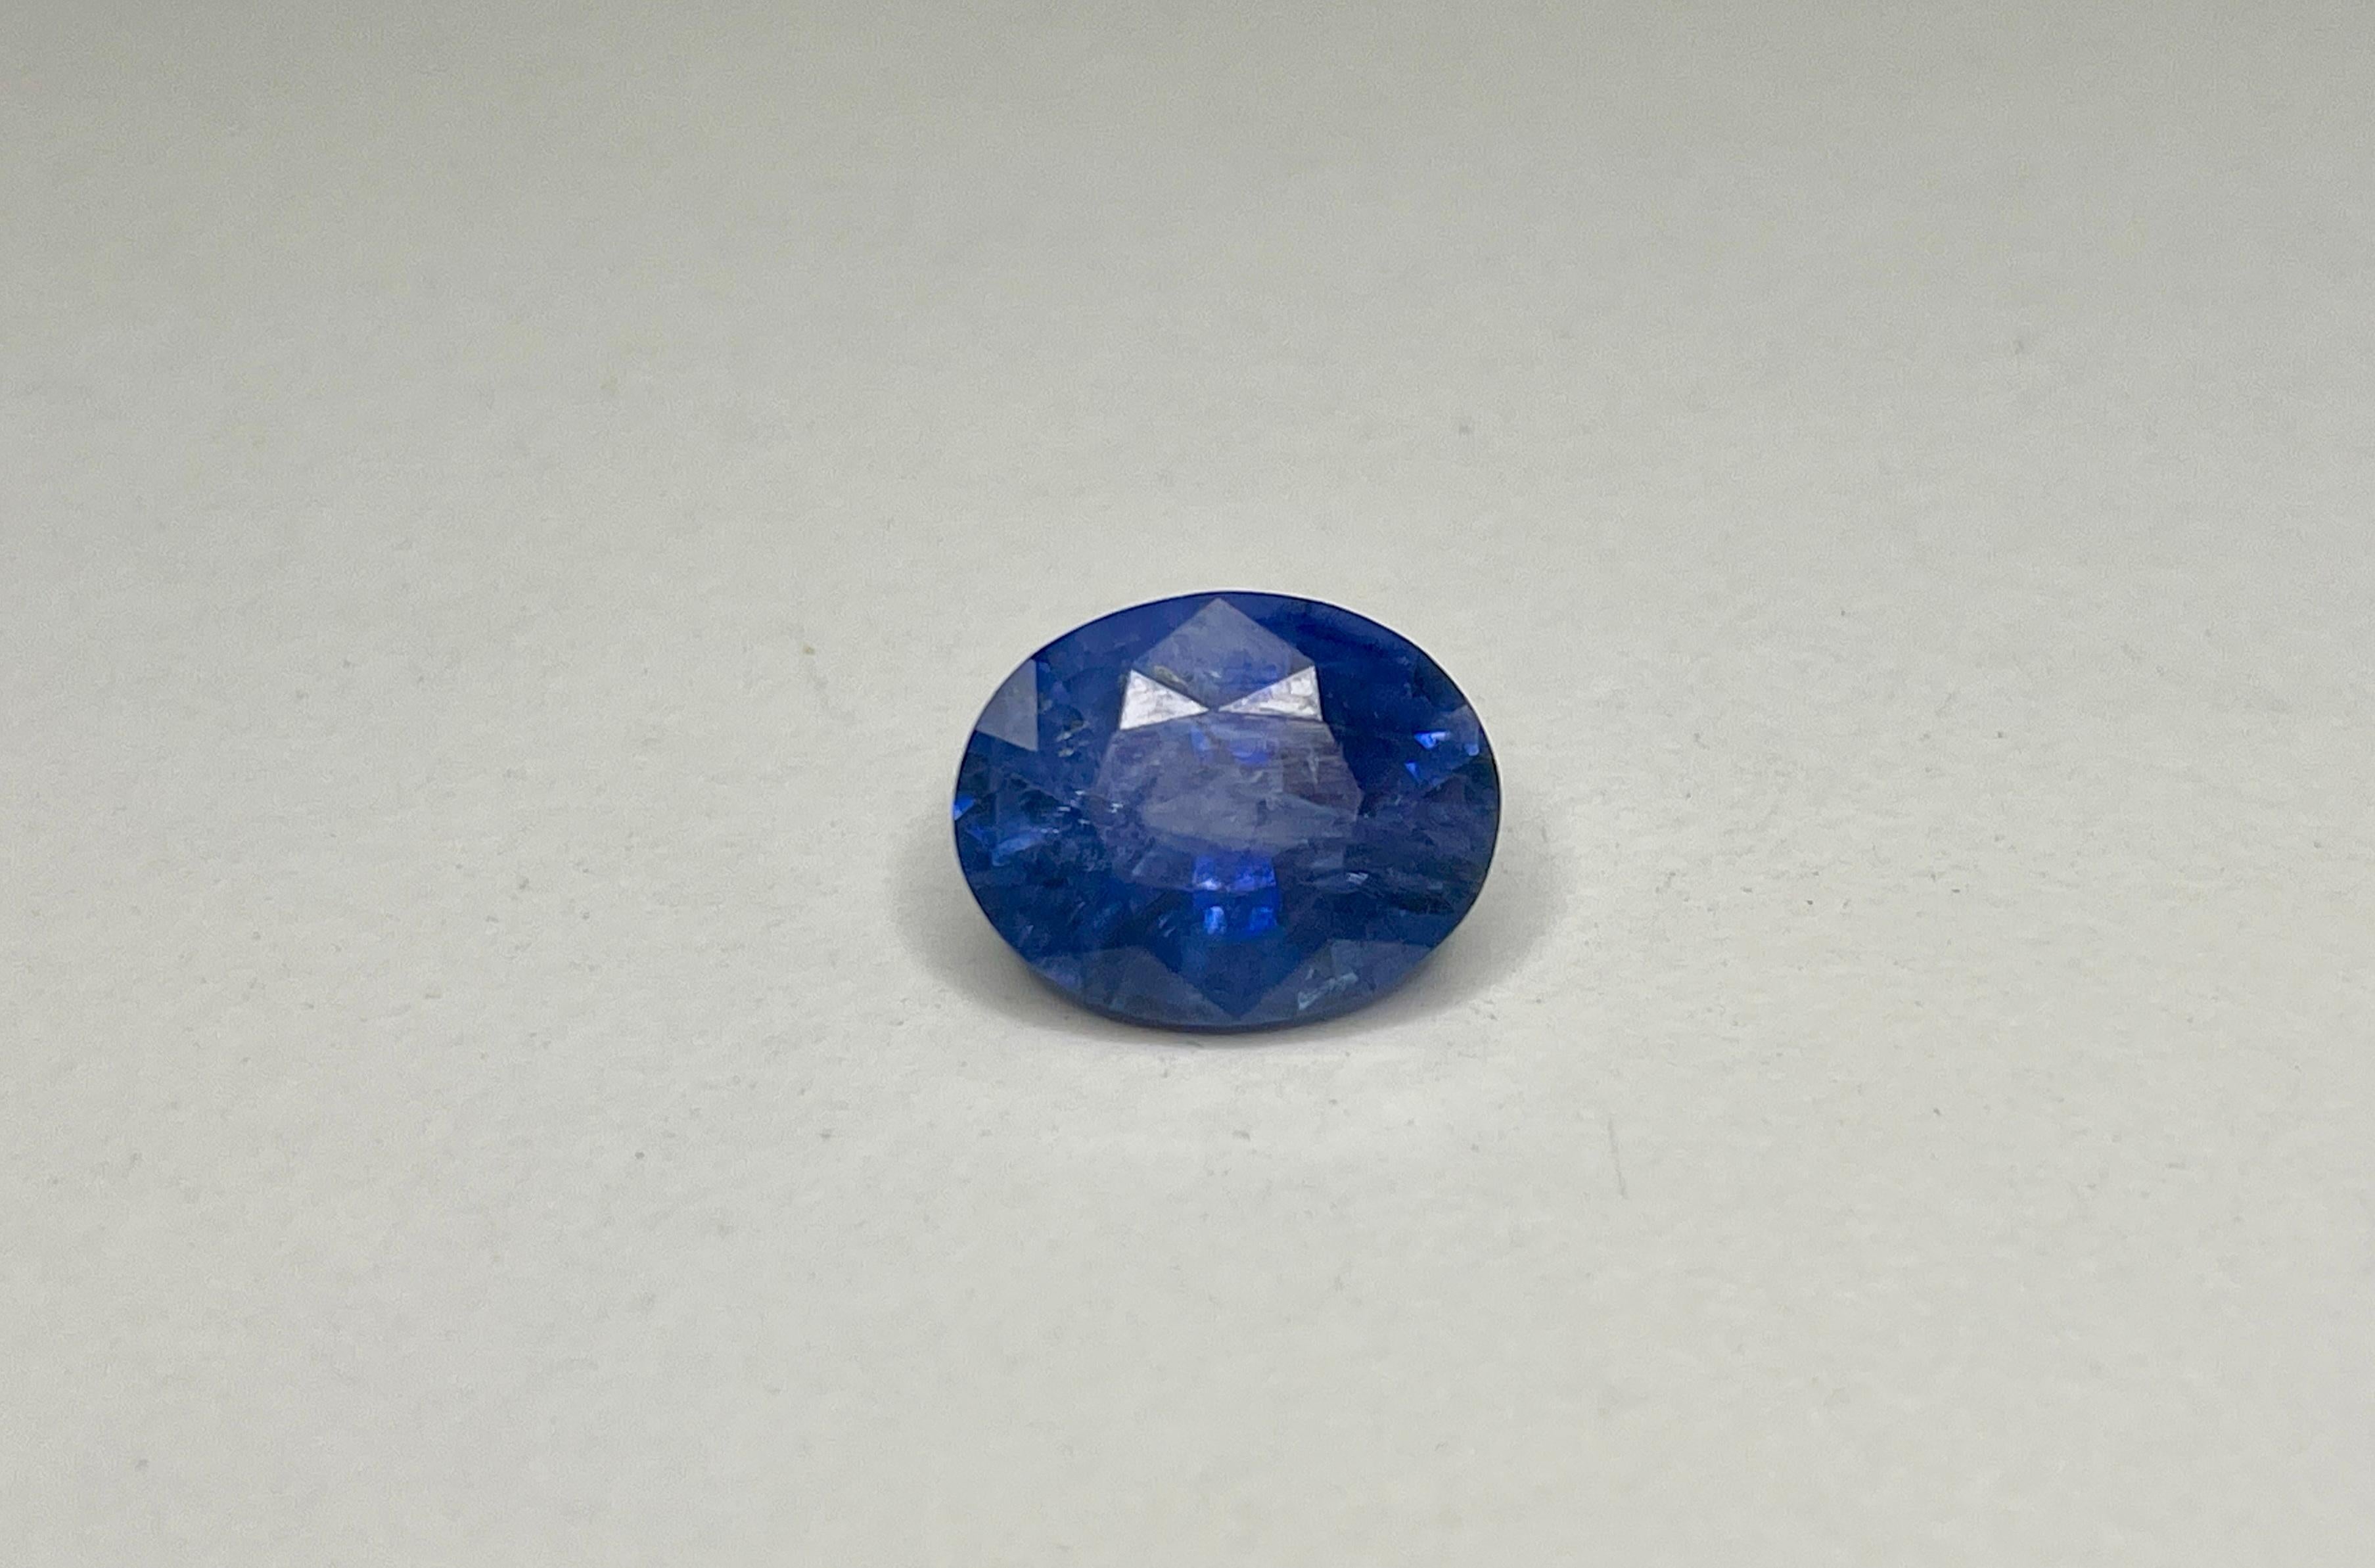 9.13 CTS NATURAL CORNFLOWER BLUE OVAL CUT GENUINE SAPPHIRE LOOSE GEM
STANDARD HEAT ONLY TREATEMENT, GORGEOUS COLOR AND SIZE
MEASUREMENTS 10.70mm X 12.20mm 

*FREE SHIPPING WITHIN THE U.S.*